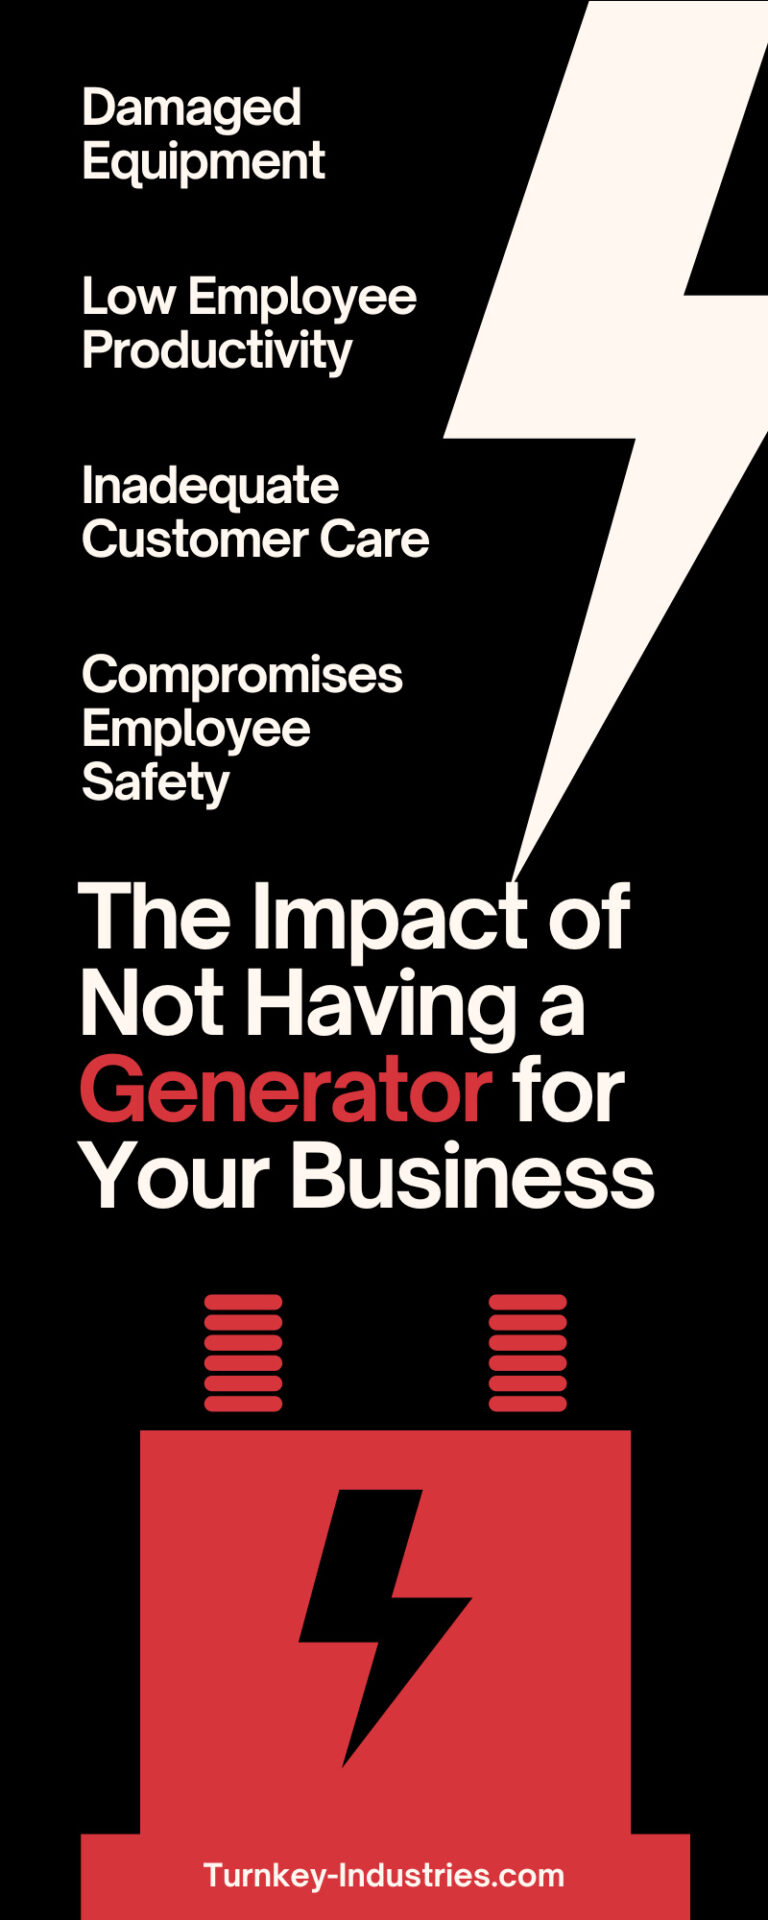 The Impact of Not Having a Generator for Your Business
